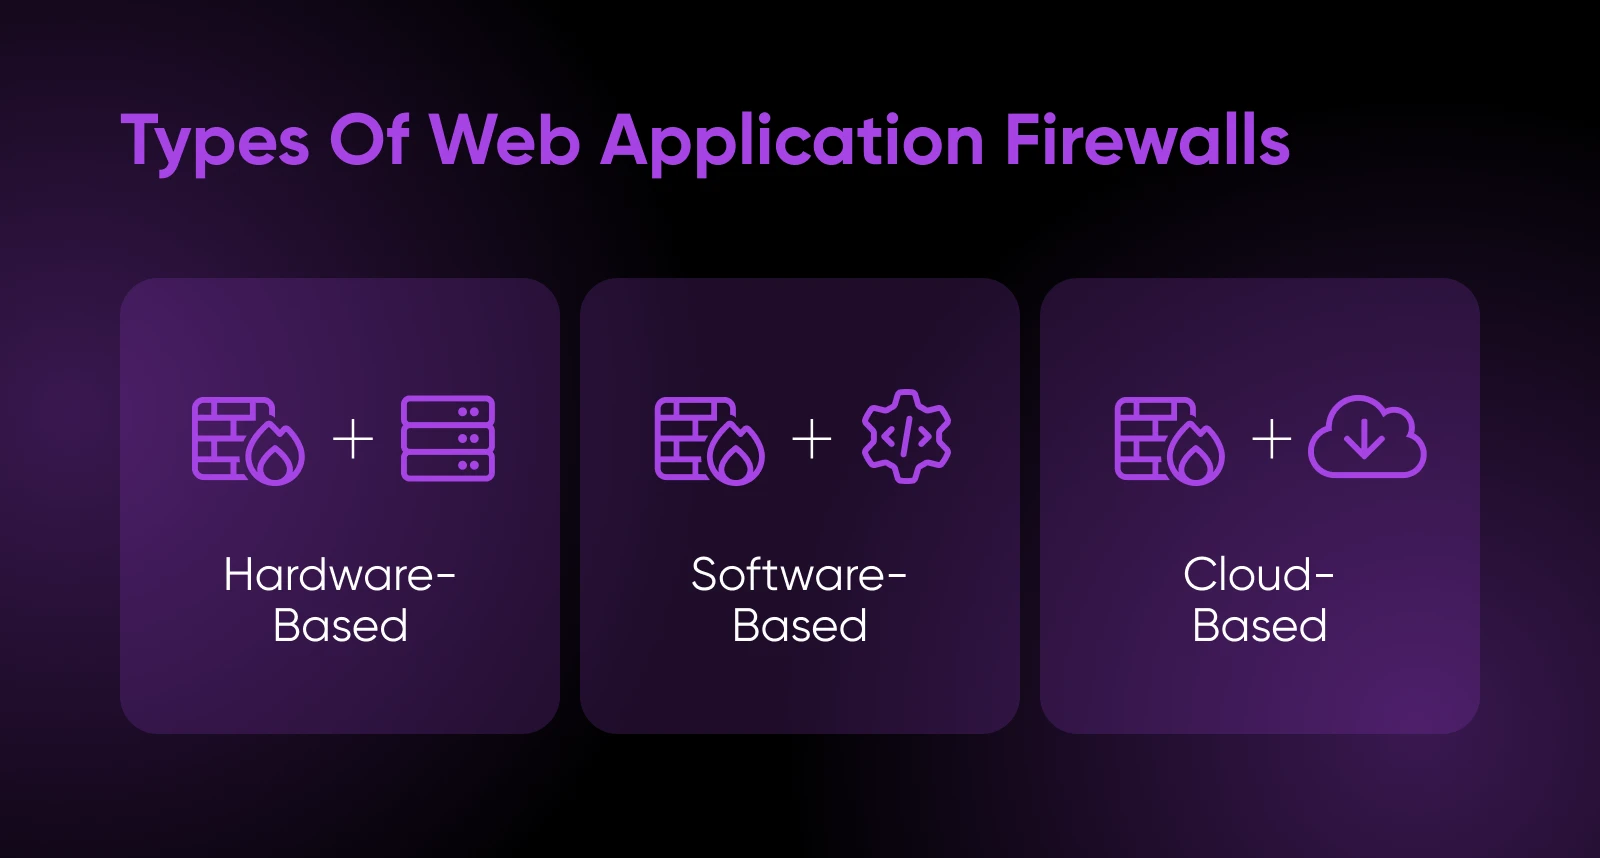 Types of web application firewalls – hardware-, software-, and cloud-based –are shown with purple icons.